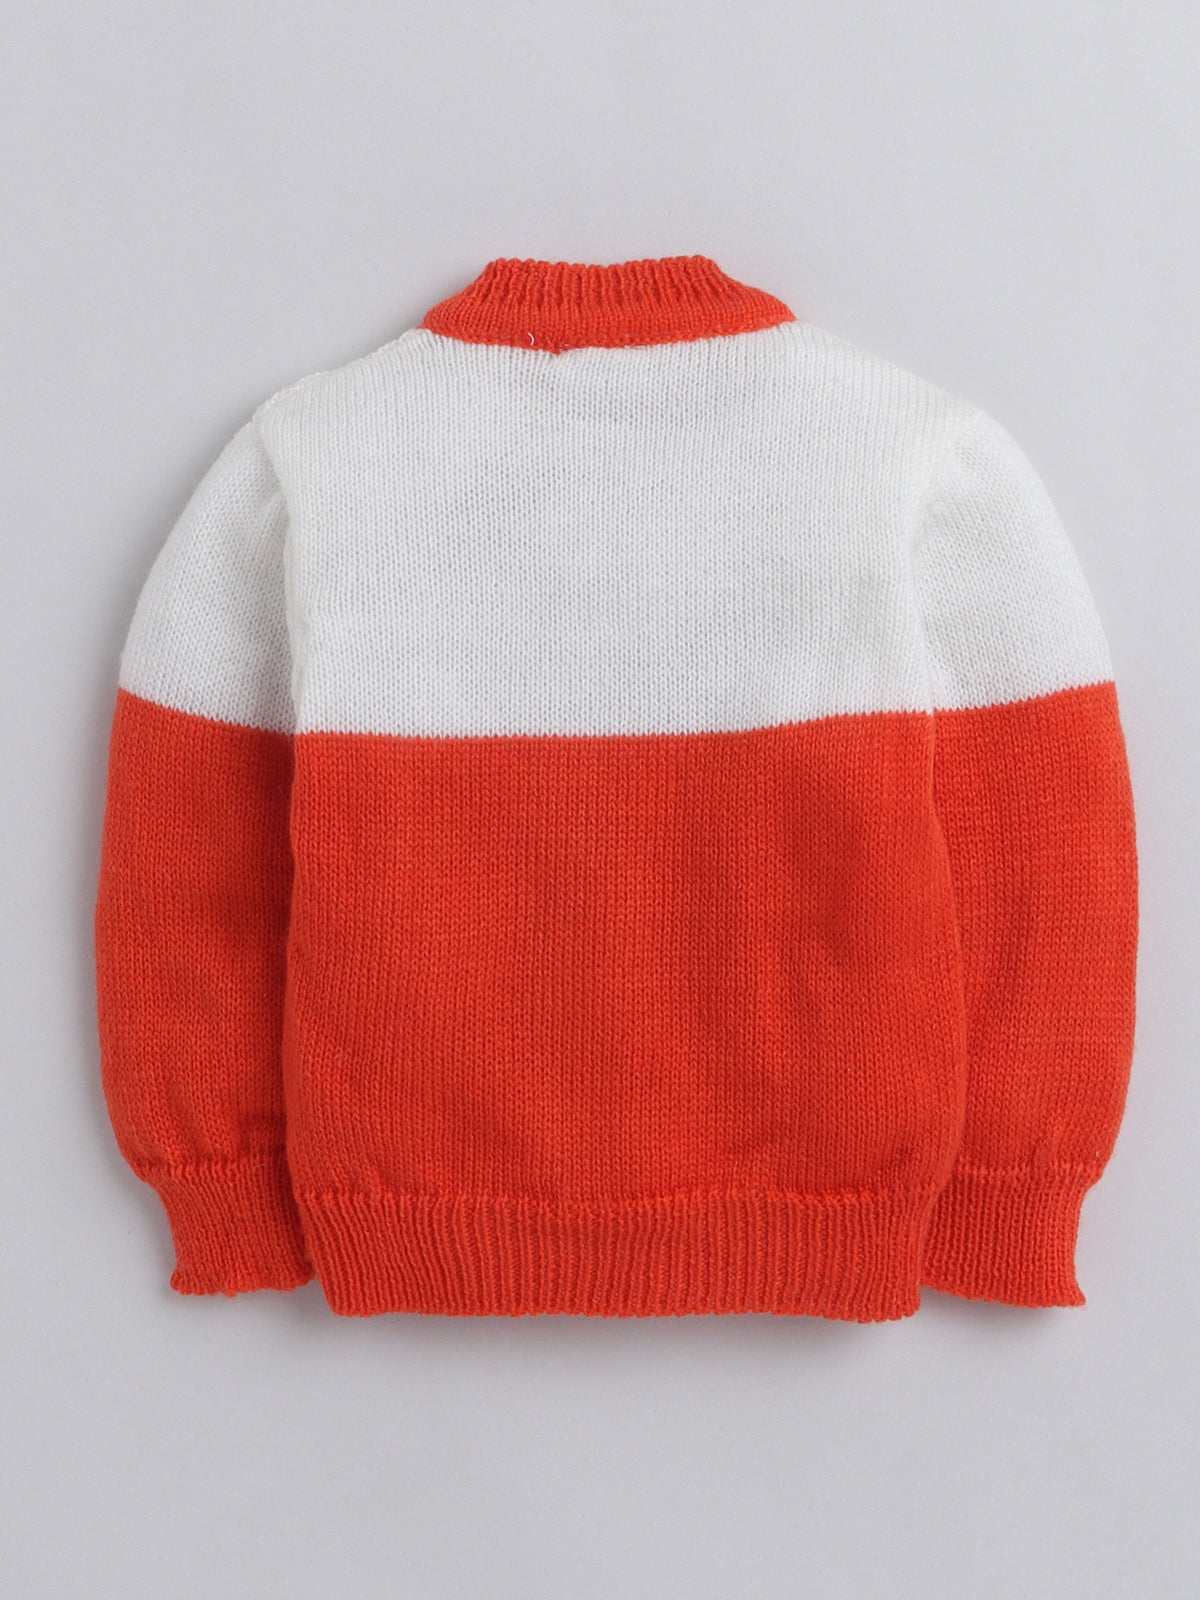 Red & White Knit Cardigan for baby boy and baby girl